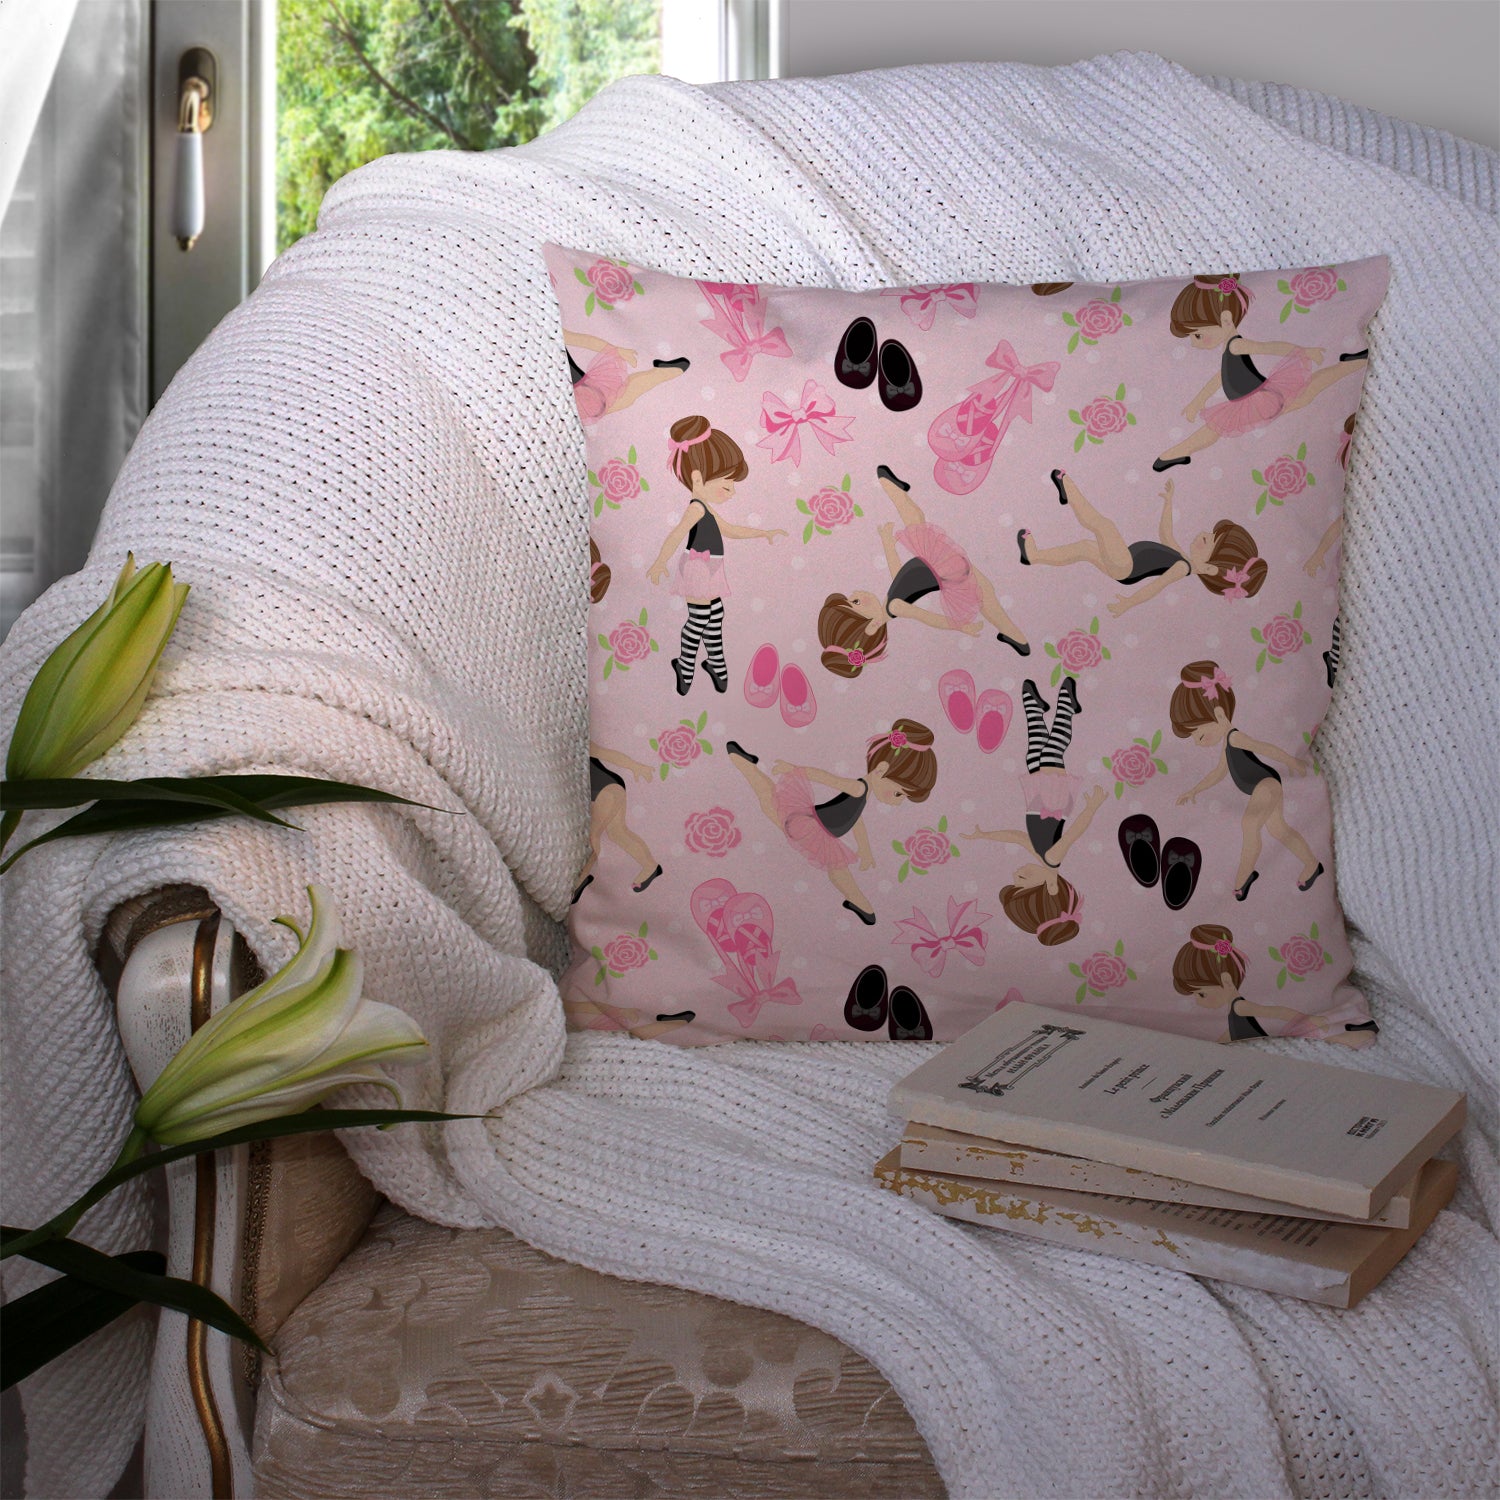 Ballerinas and Roses Fabric Decorative Pillow BB5172PW1414 - the-store.com